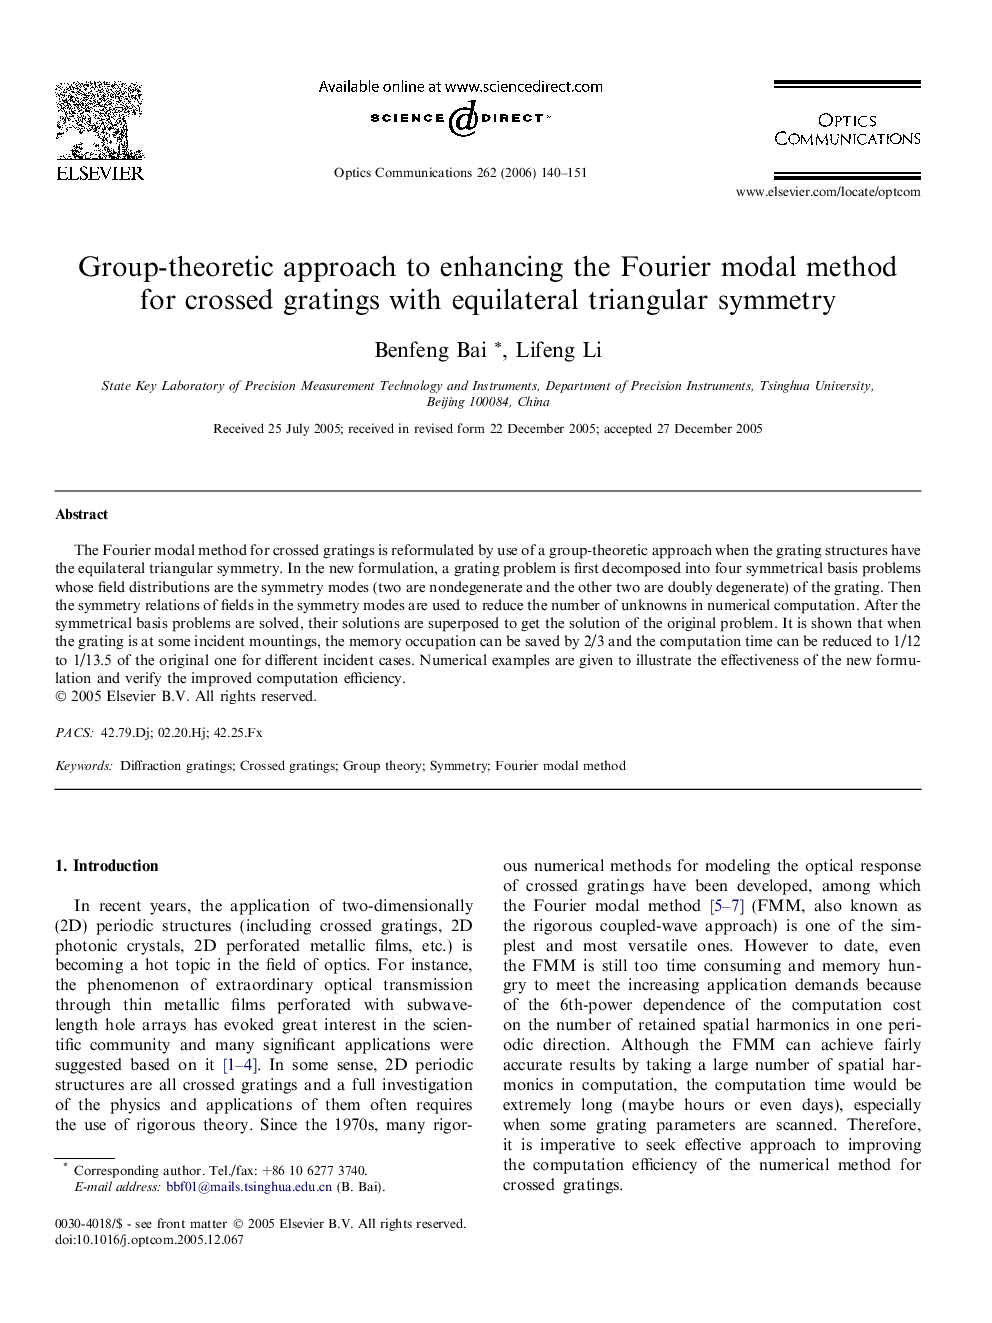 Group-theoretic approach to enhancing the Fourier modal method for crossed gratings with equilateral triangular symmetry